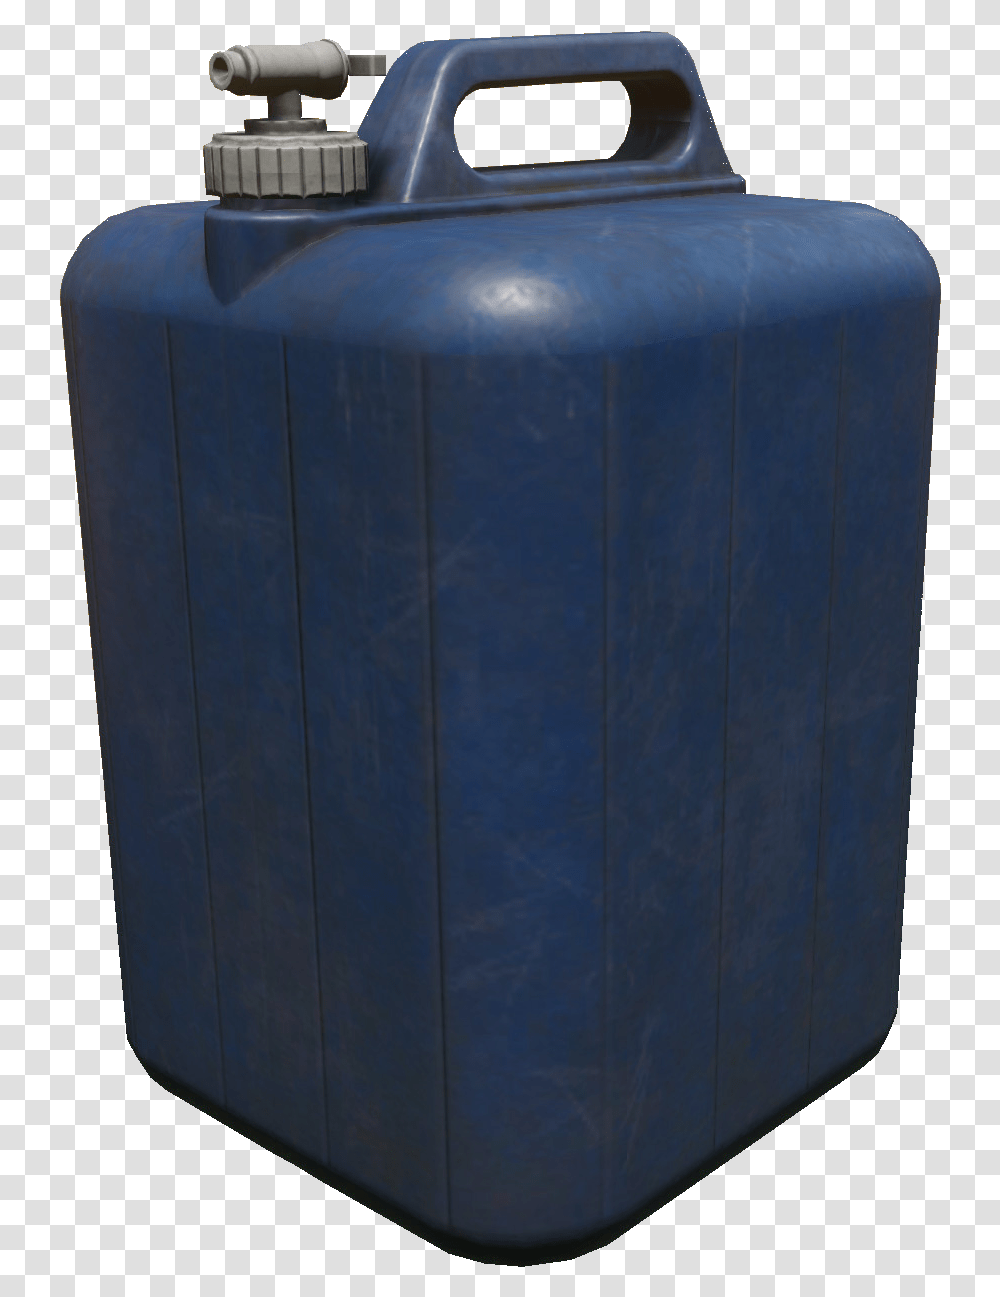 Water Jug Miscreated Wiki Fandom Briefcase, Tin, Trash Can, Mailbox, Letterbox Transparent Png